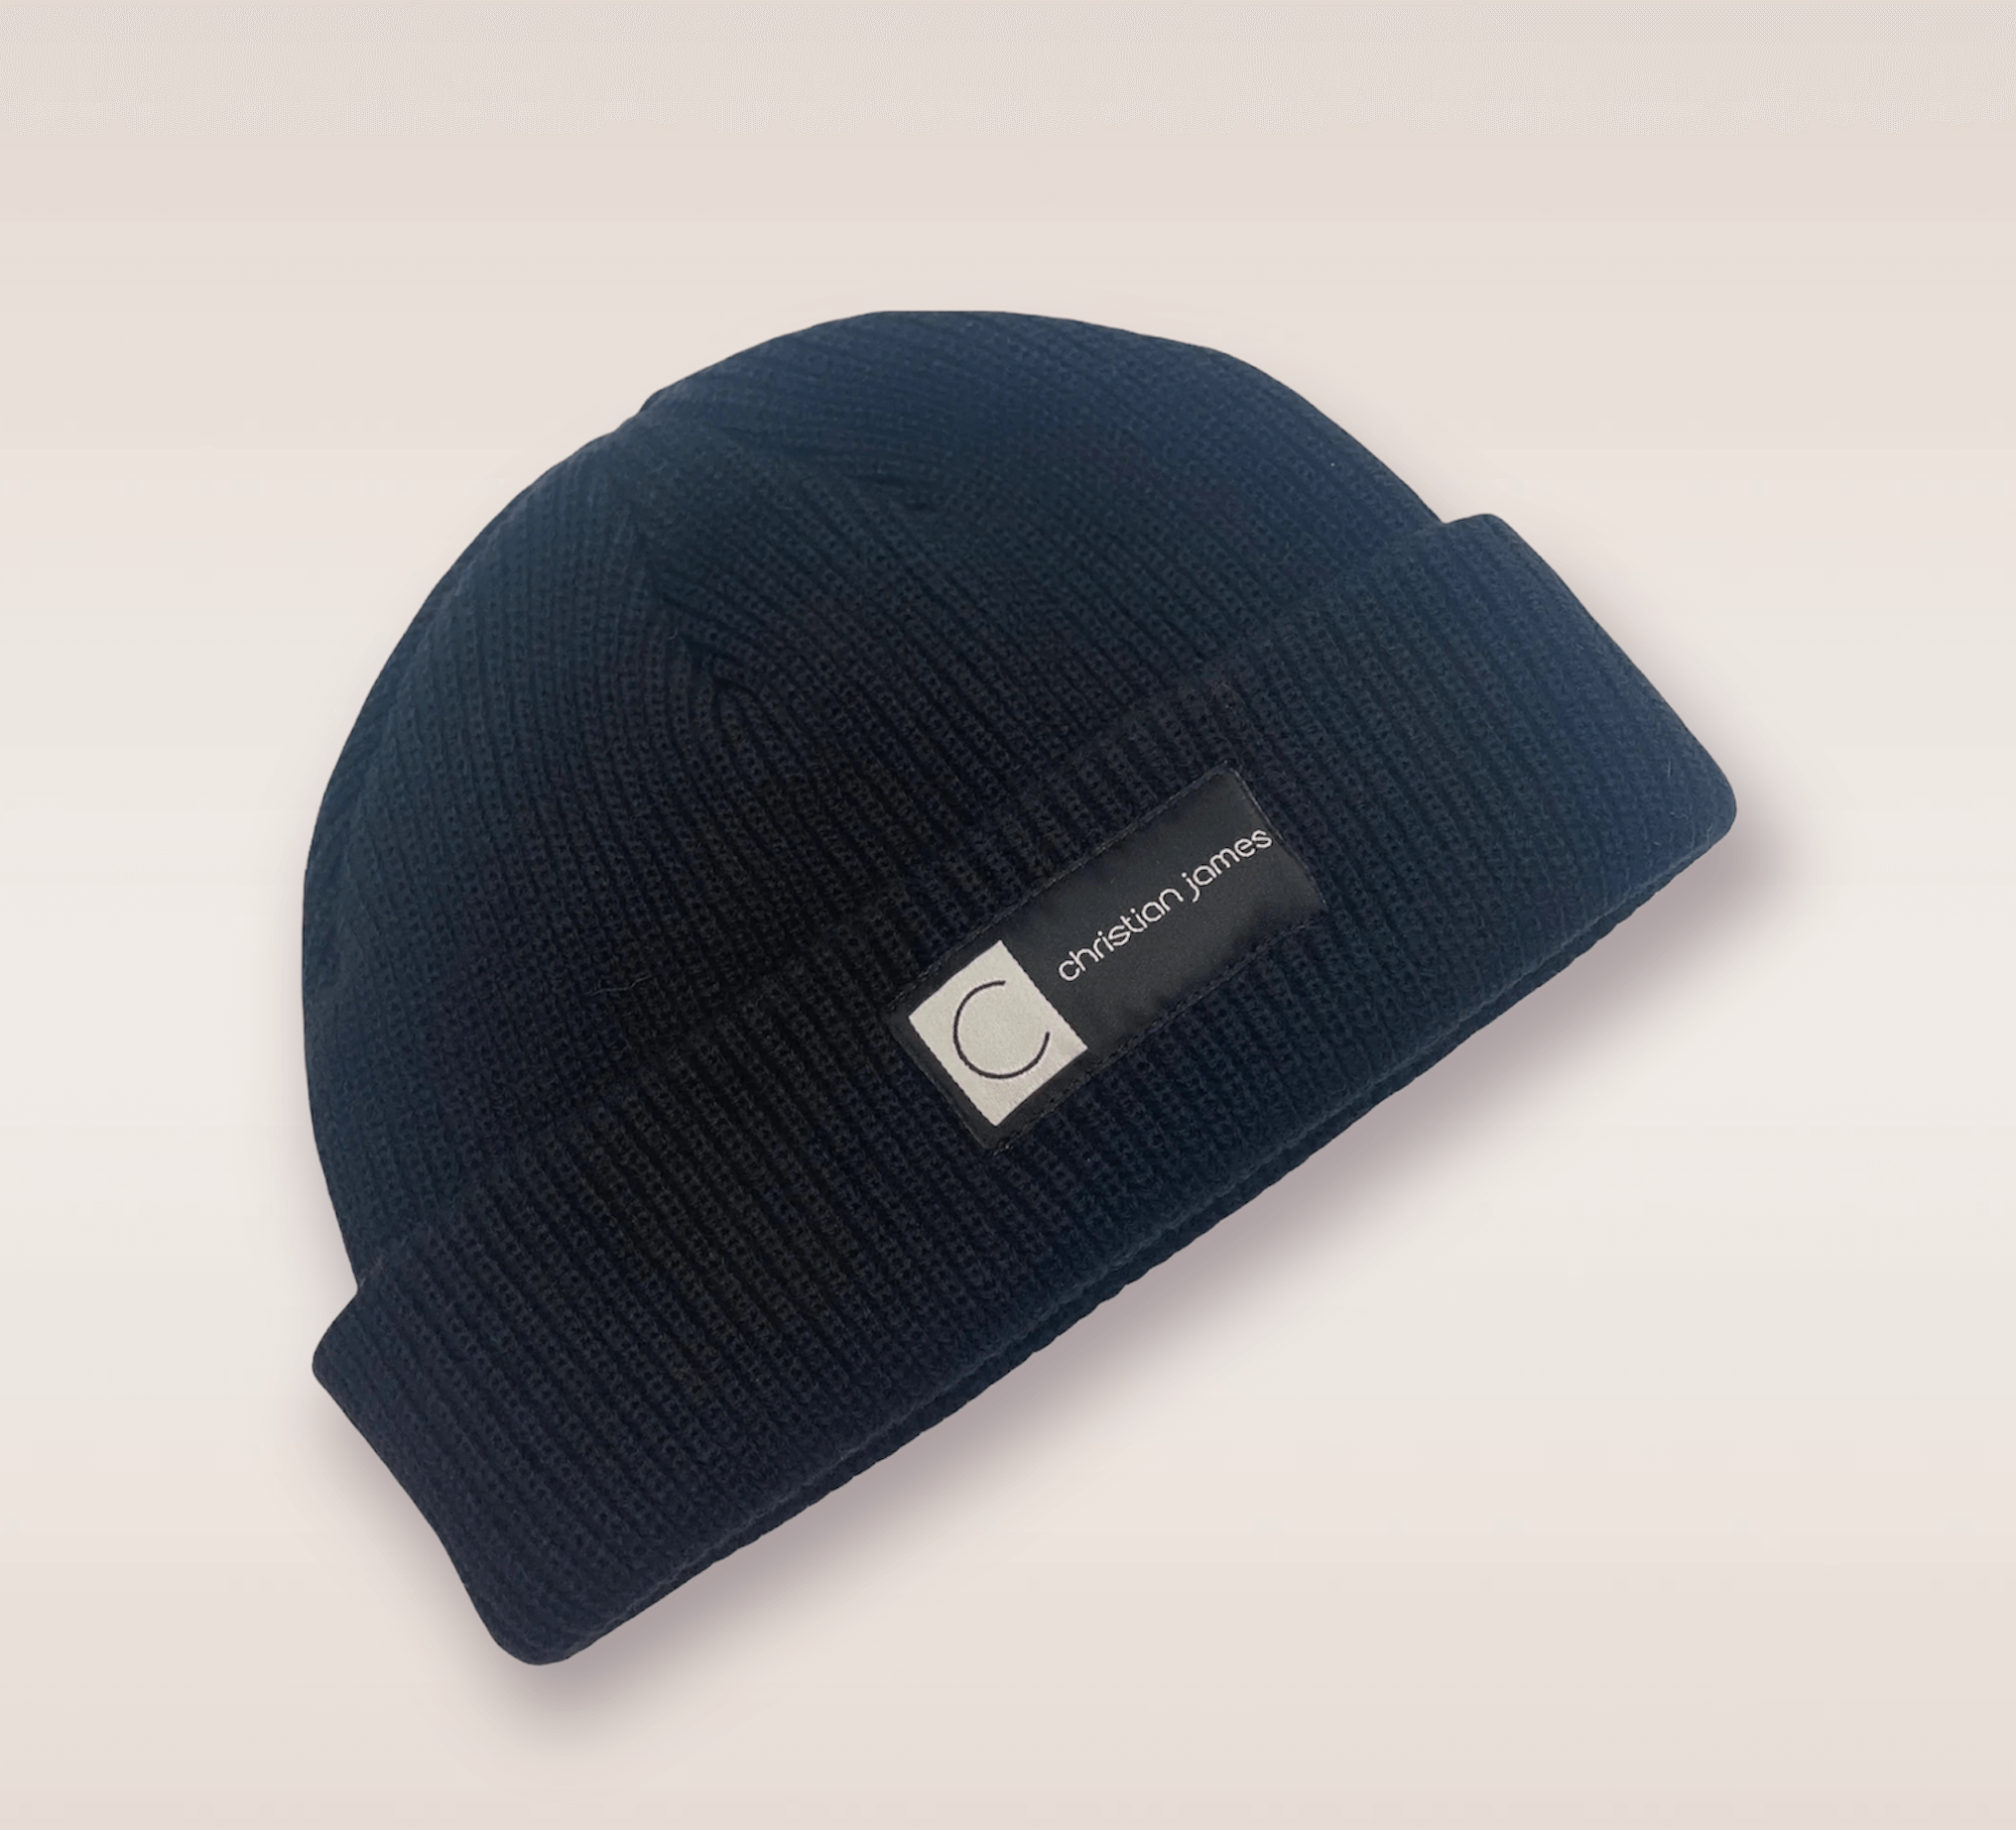 In this up-close shot, we are introduced to the Black CJ beanie. A black knit hat featuring an embroidered patch of the brand's acronym in black and white. 